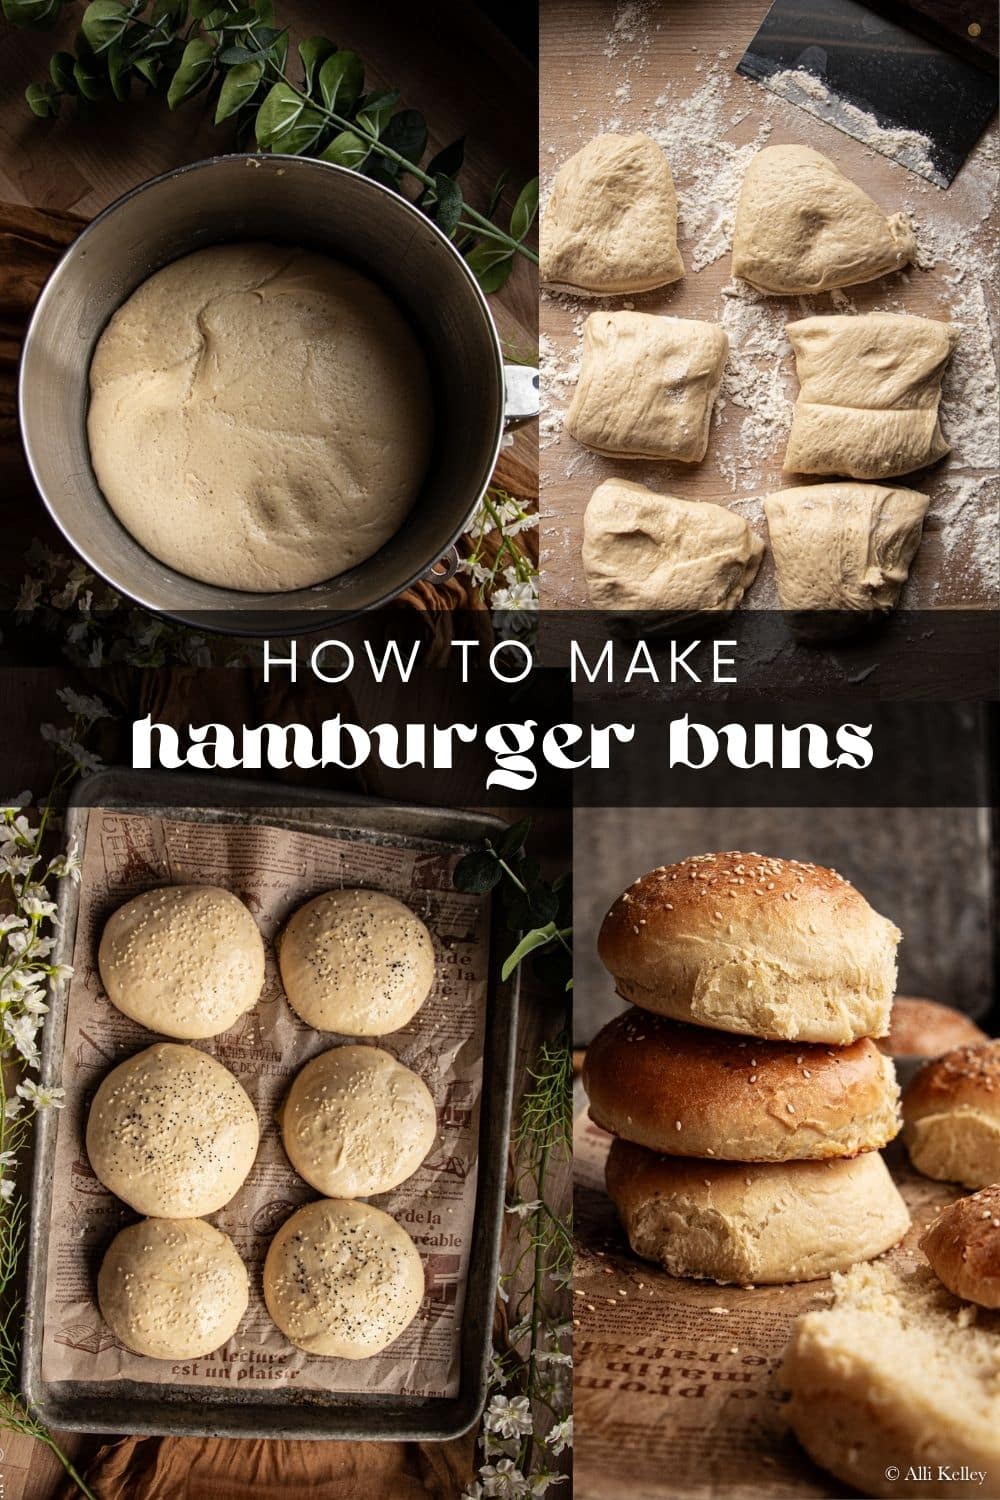 Making homemade hamburger buns is easier than you think! Using just a few pantry staples, you can make soft and fluffy hamburger buns that rival anything in the grocery store. Stuff them with your favorite fillings and enjoy a delicious, homemade meal your family will love!